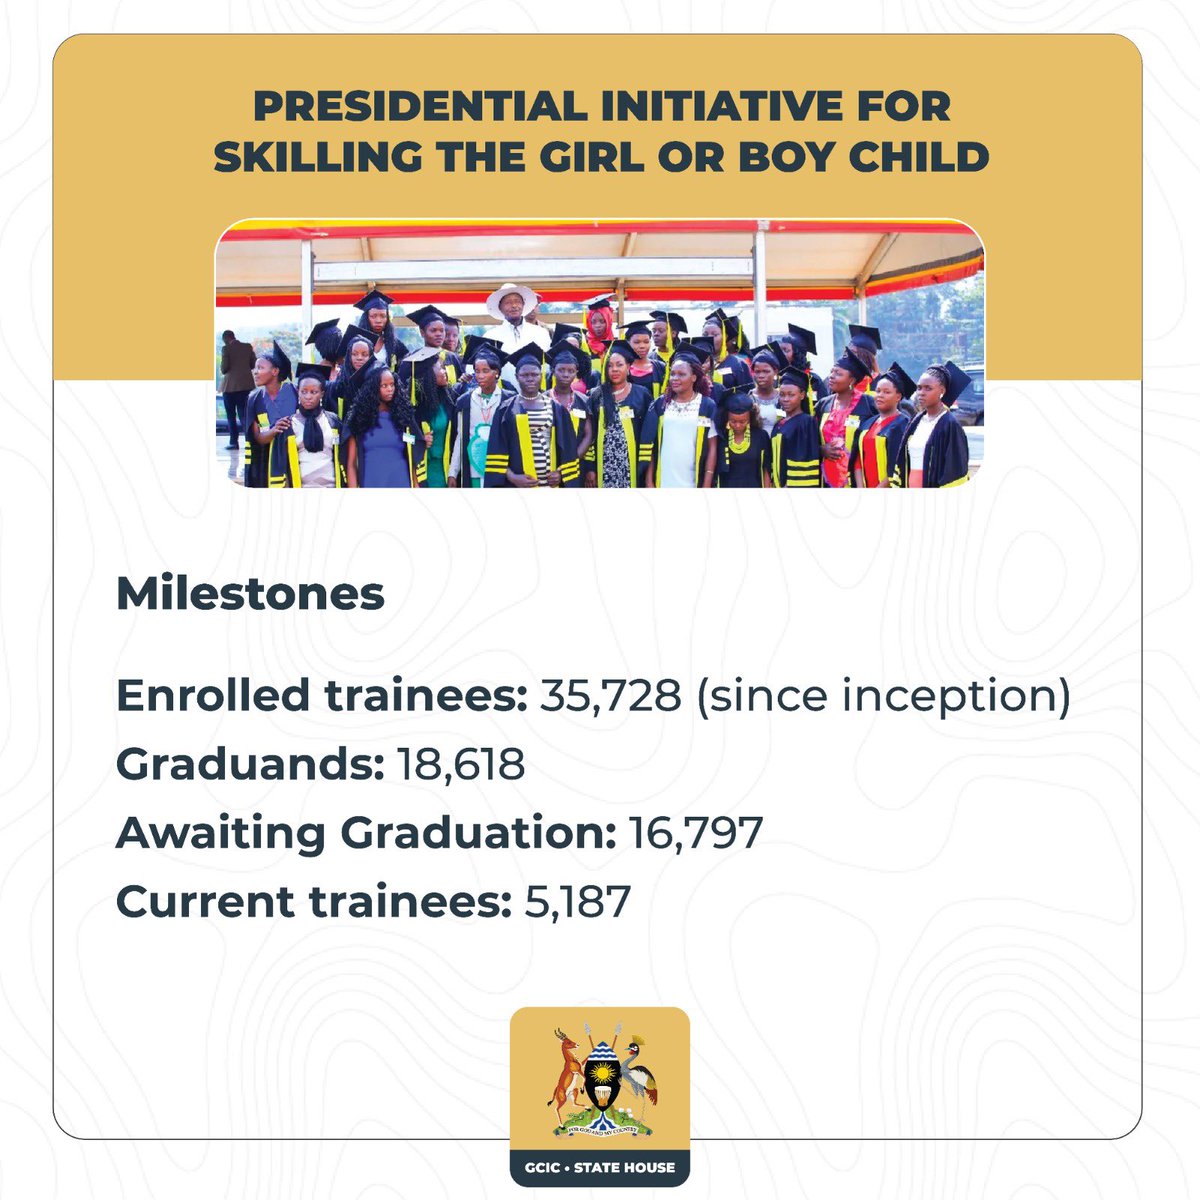 Education knows no gender! Kudos to President @KagutaMuseveni that launched the Presidential Initiative for Skilling the Girl/Boy Child that has benefited 35,728 trainees since it’s inception. Let's bridge the opportunity gap and create a brighter future. #OpenGovUg